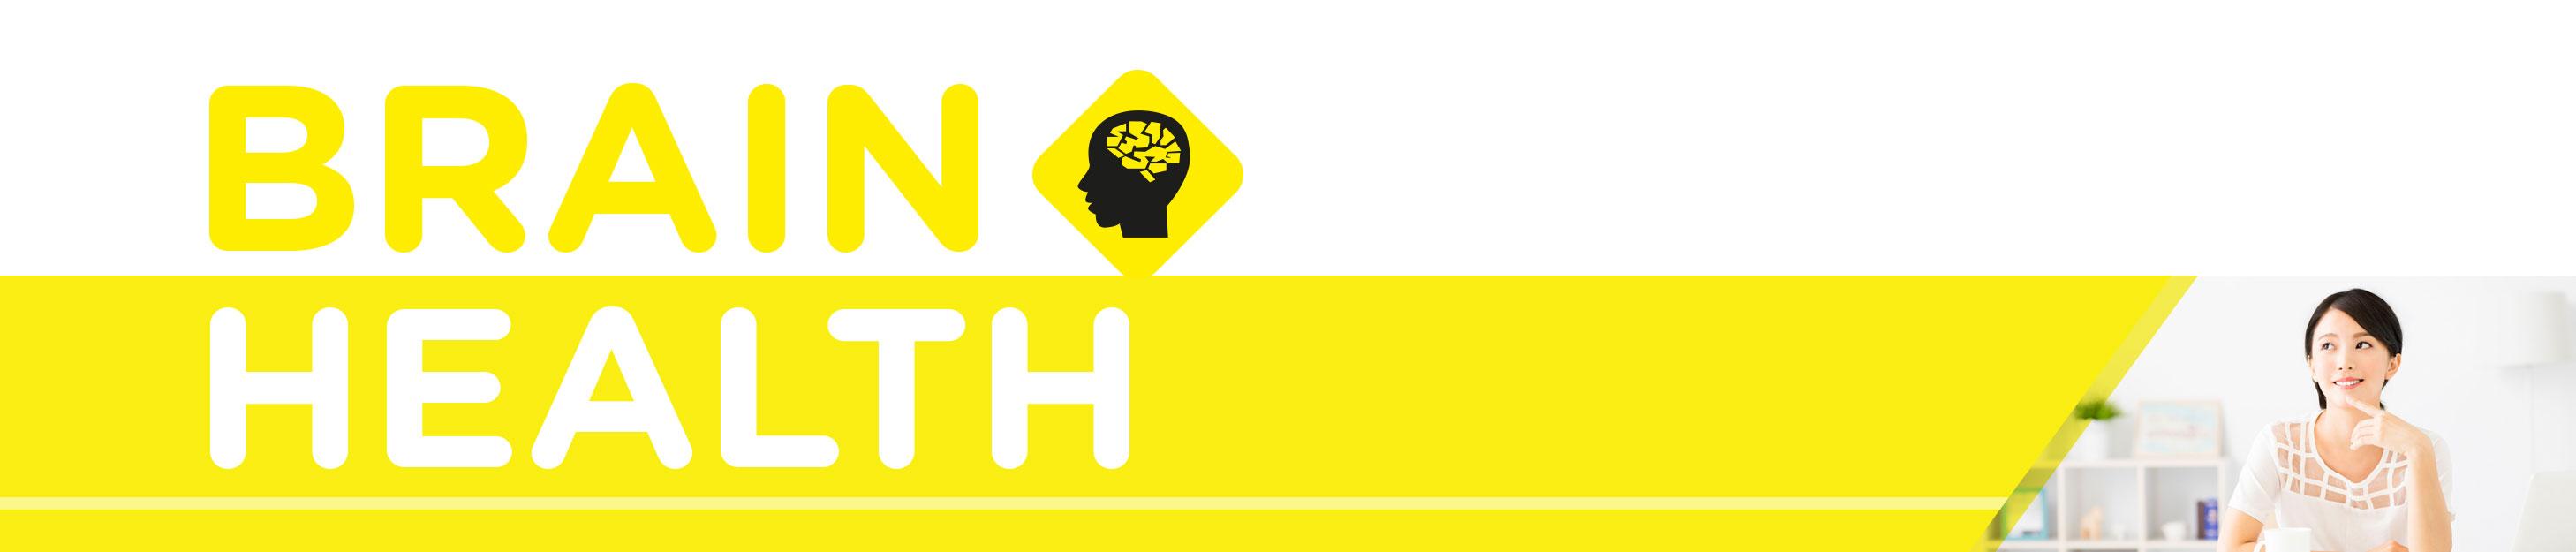 Health Product Yellow Logo - Brain Health - Products | Oceanhealth - Health Supplements ...